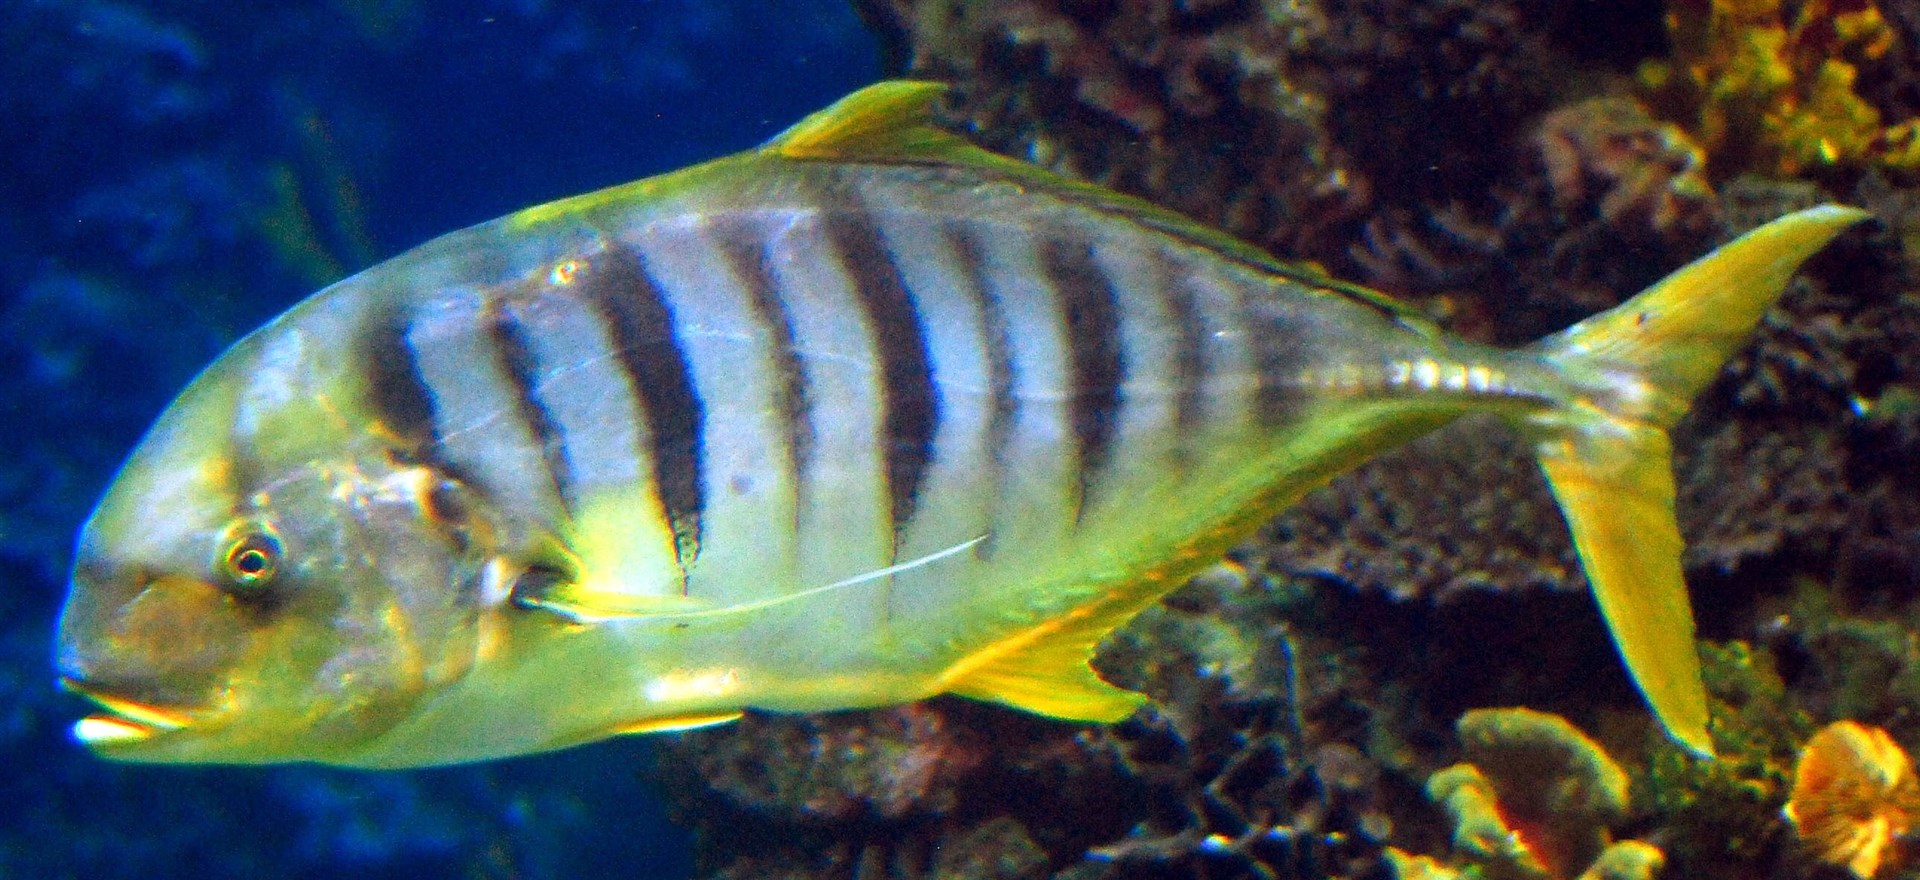 Golden trevally can grow to nearly four feet in length.